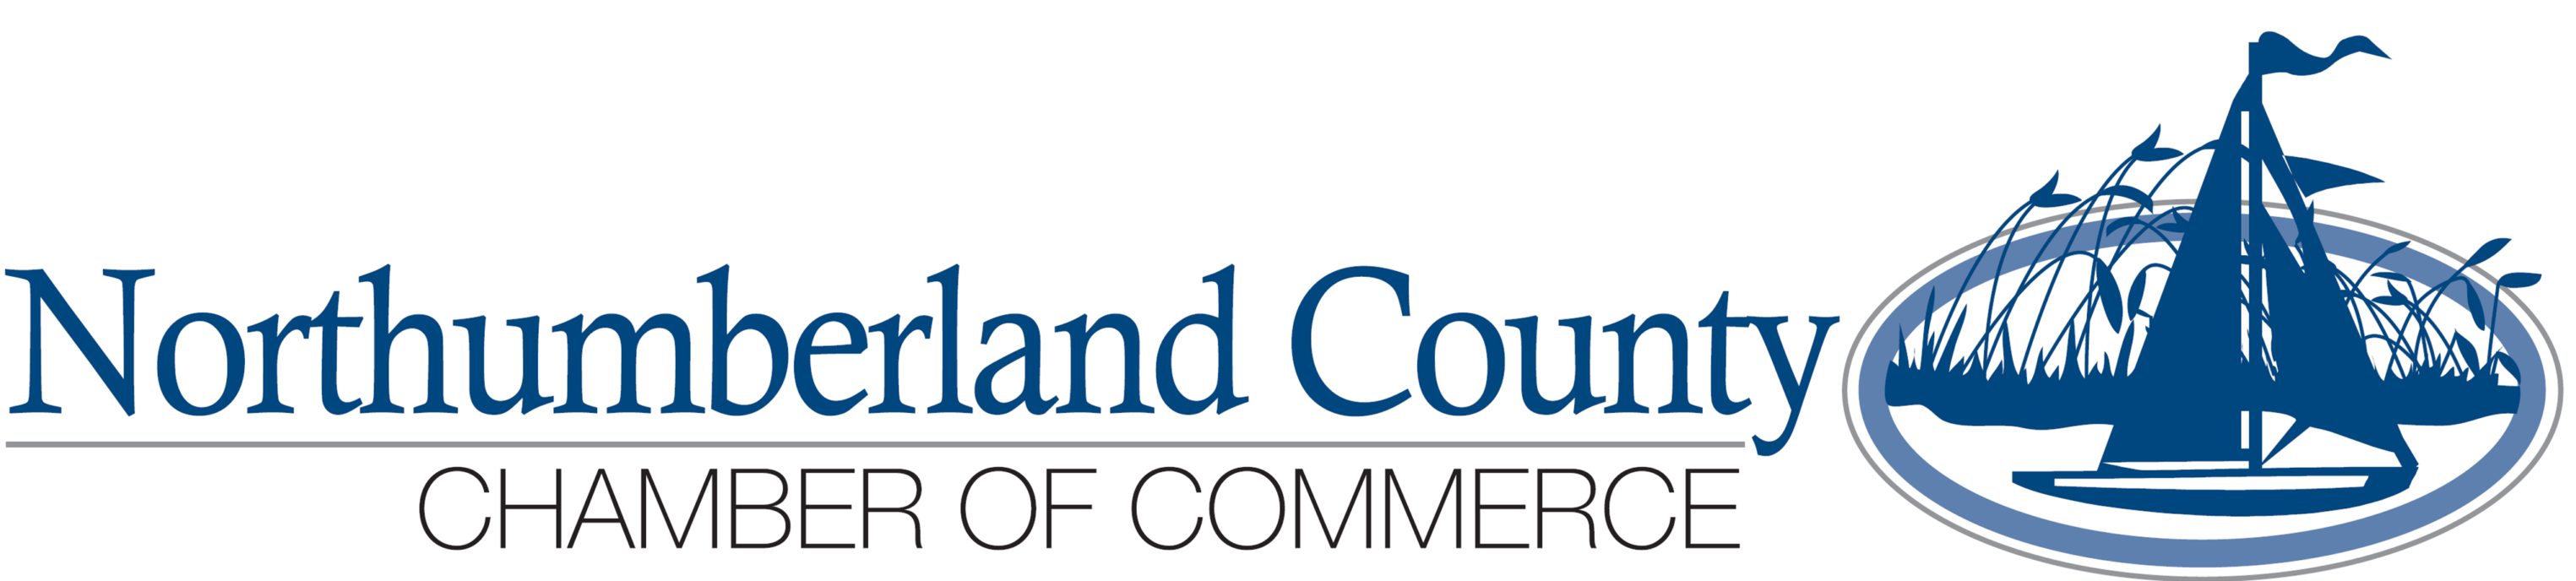 Welcome to the Northumberland County Chamber of Commerce